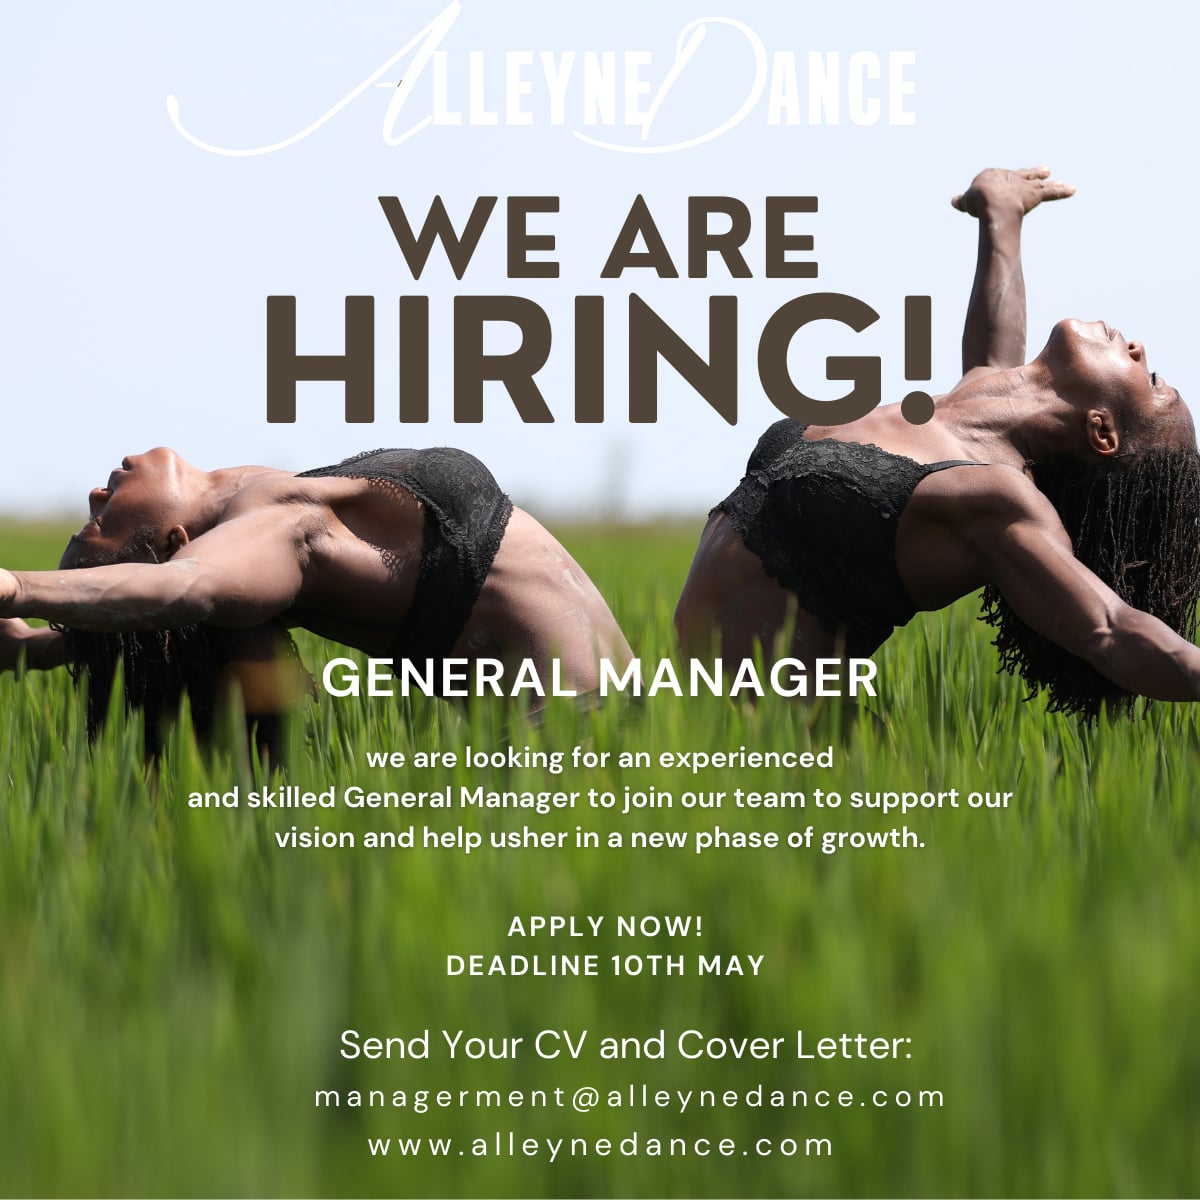 NEW OPPORTUNITY 🚨 The General Manager will lead on the operational management across Alleyne Dance’s artistic portfolio as well as supporting delivery of the company’s strategic developmental plans. alleynedance.com & head to the OPPORTUNITIES page 📸 @avidalet